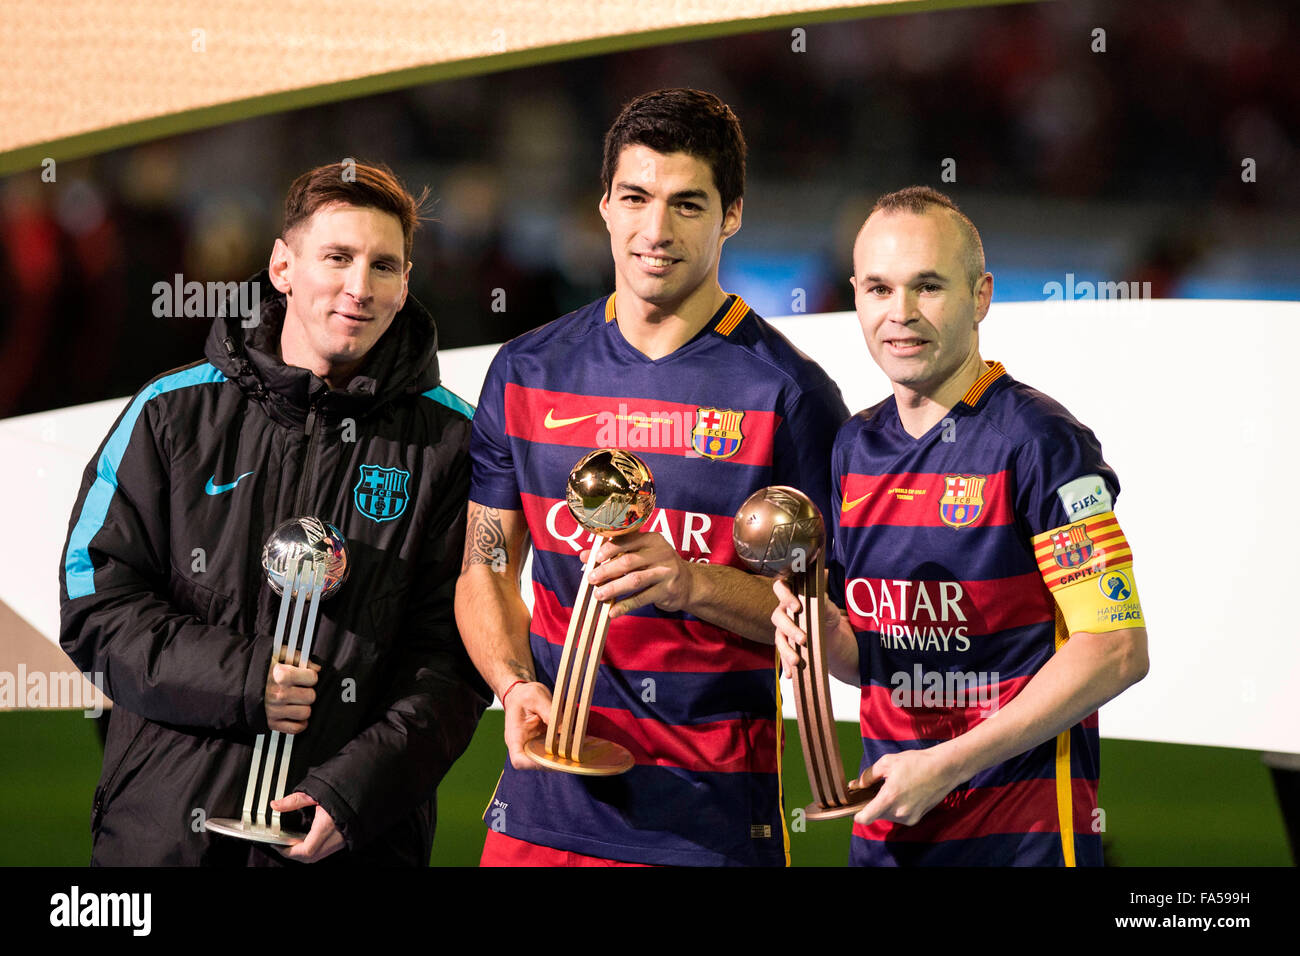 Kanagawa, Japan. 20th Dec, 2015. (L-R) Lionel Messi, Luis Suarez, Andres Iniesta (Barcelona) Football/Soccer : Golden Ball winner Luis Suarez, Silver Ball winner Lionel Messi and Bronze Ball winner Andres Iniesta, all Barcelona players, pose with their trophies after the FIFA Club World Cup Japan 2015 Final match between River Plate 0-3 FC Barcelona at International Stadium Yokohama in Kanagawa, Japan . © Enrico Calderoni/AFLO SPORT/Alamy Live News Stock Photo